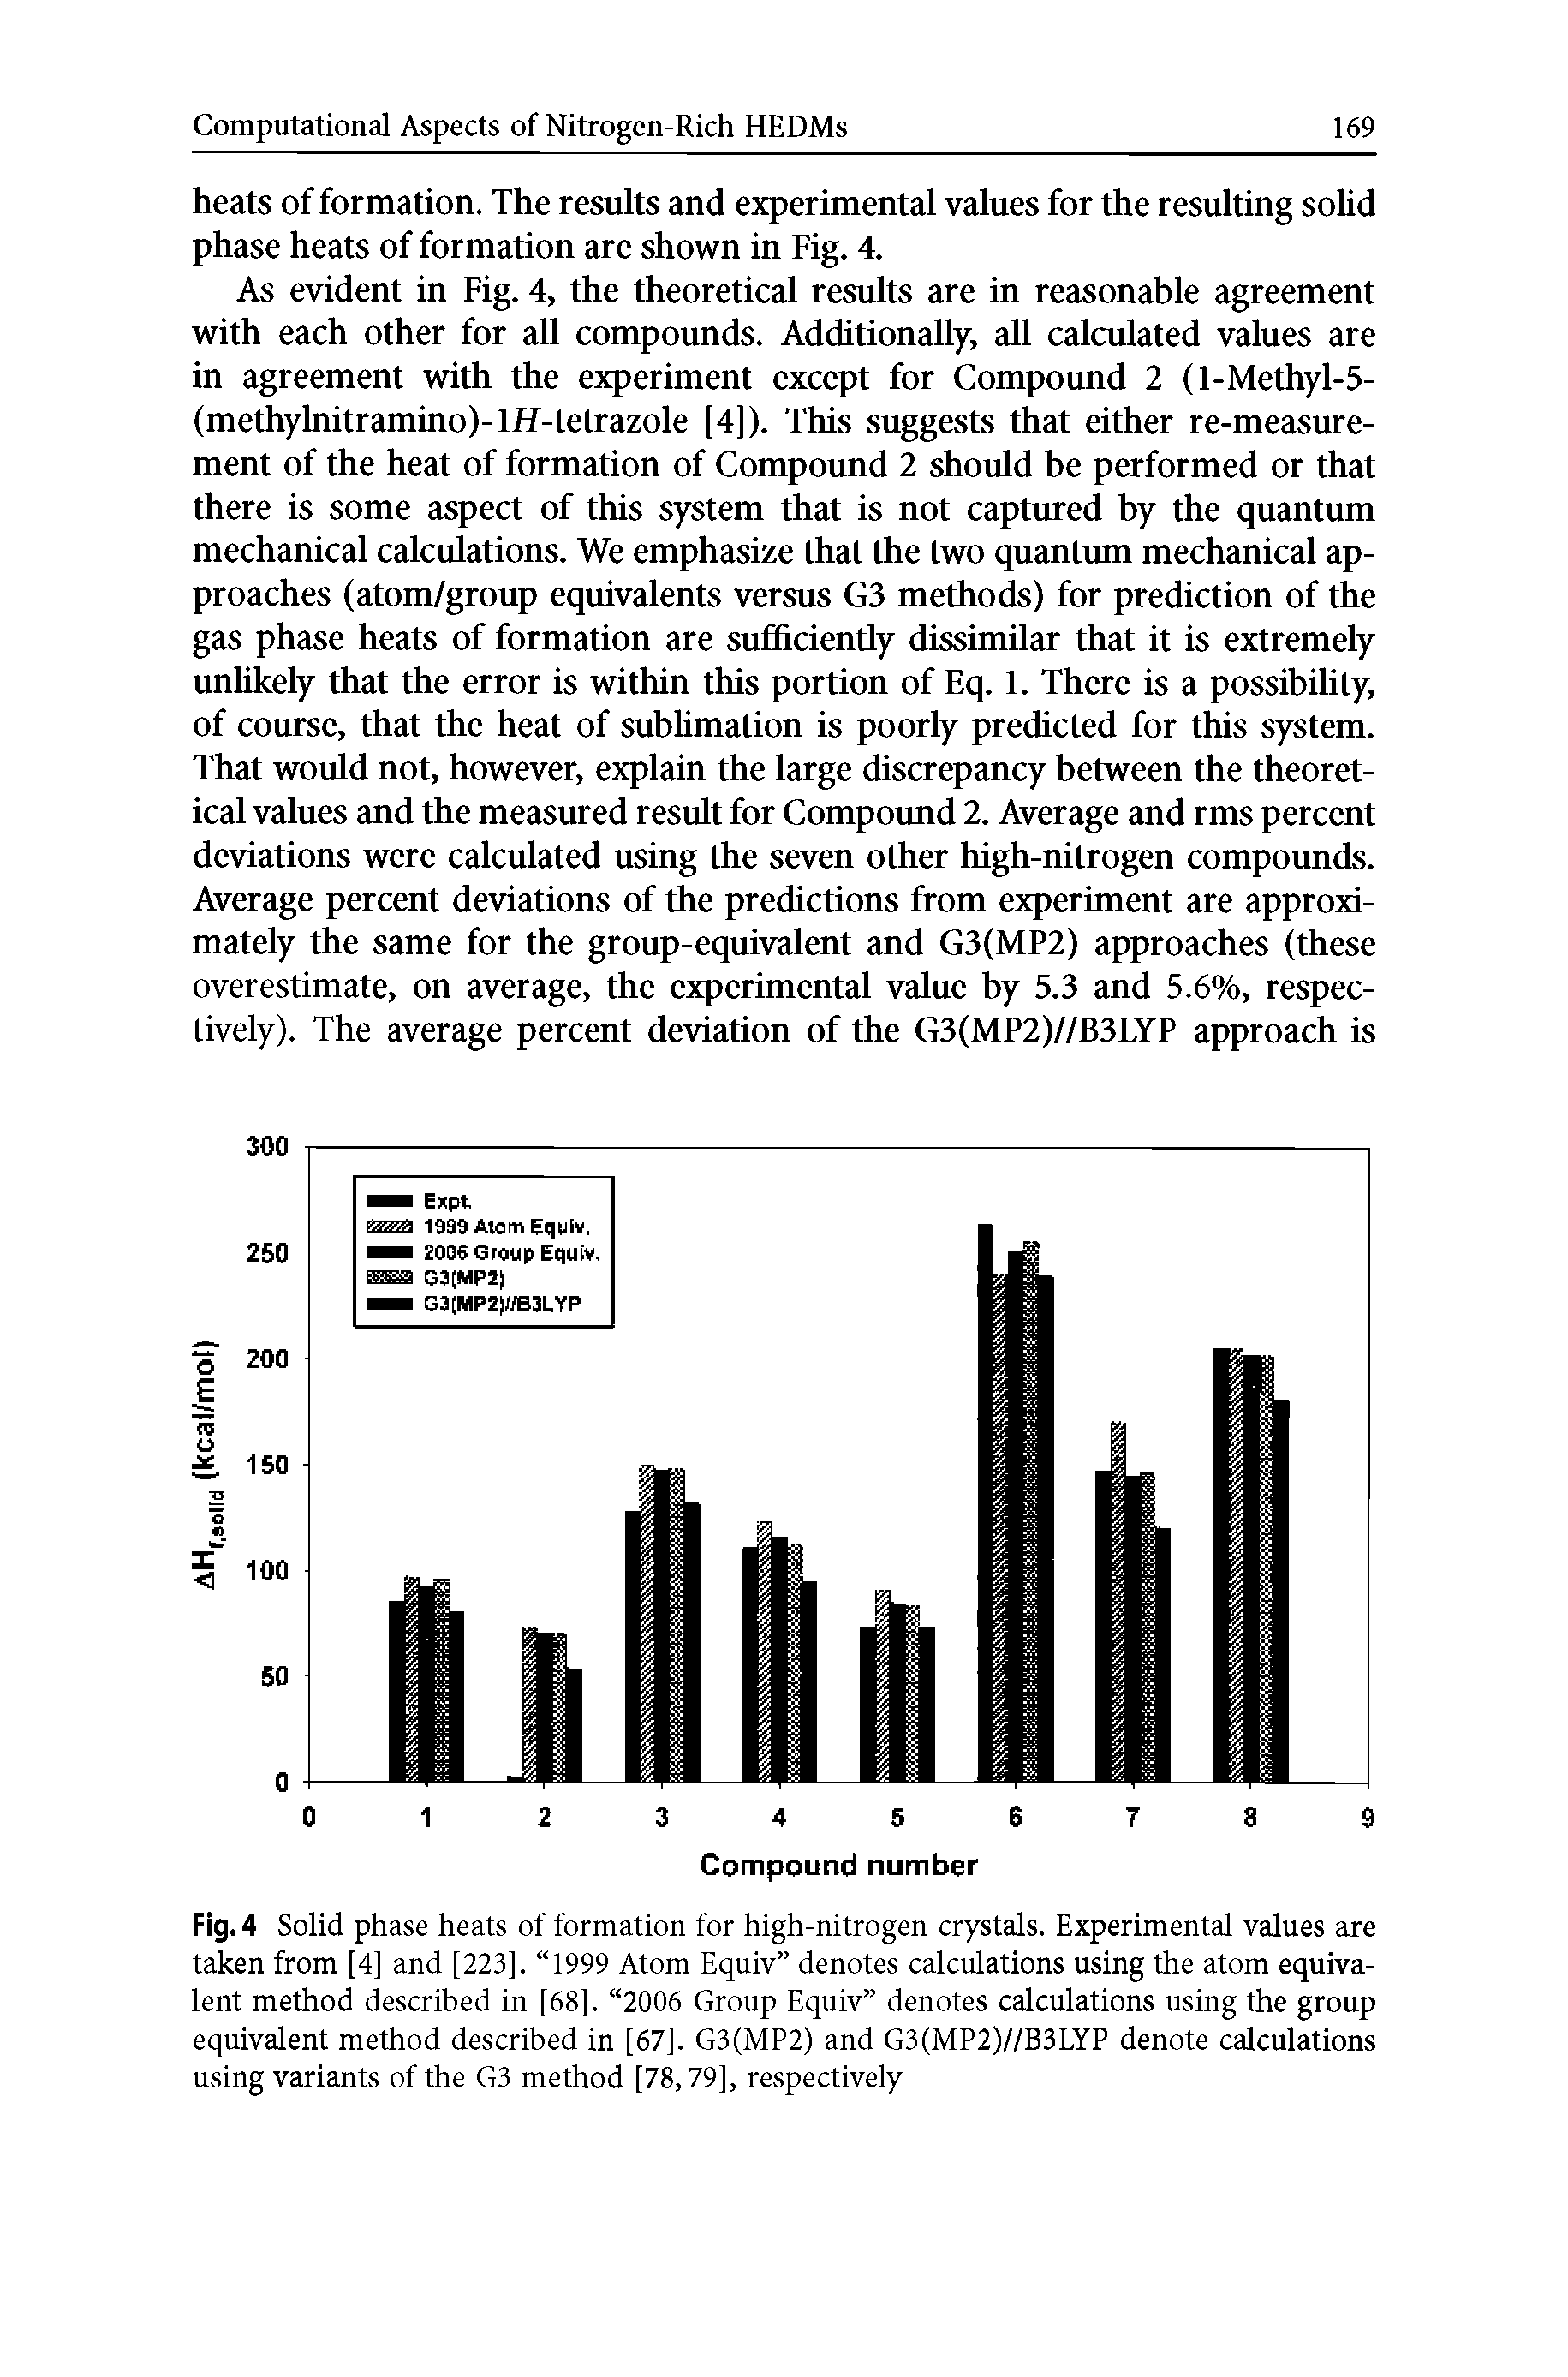 Fig. 4 Solid phase heats of formation for high-nitrogen crystals. Experimental values are taken from [4] and [223], 1999 Atom Equiv denotes calculations using the atom equivalent method described in [68], 2006 Group Equiv denotes calculations using the group equivalent method described in [67]. G3(MP2) and G3(MP2)//B3LYP denote calculations using variants of the G3 method [78,79], respectively...